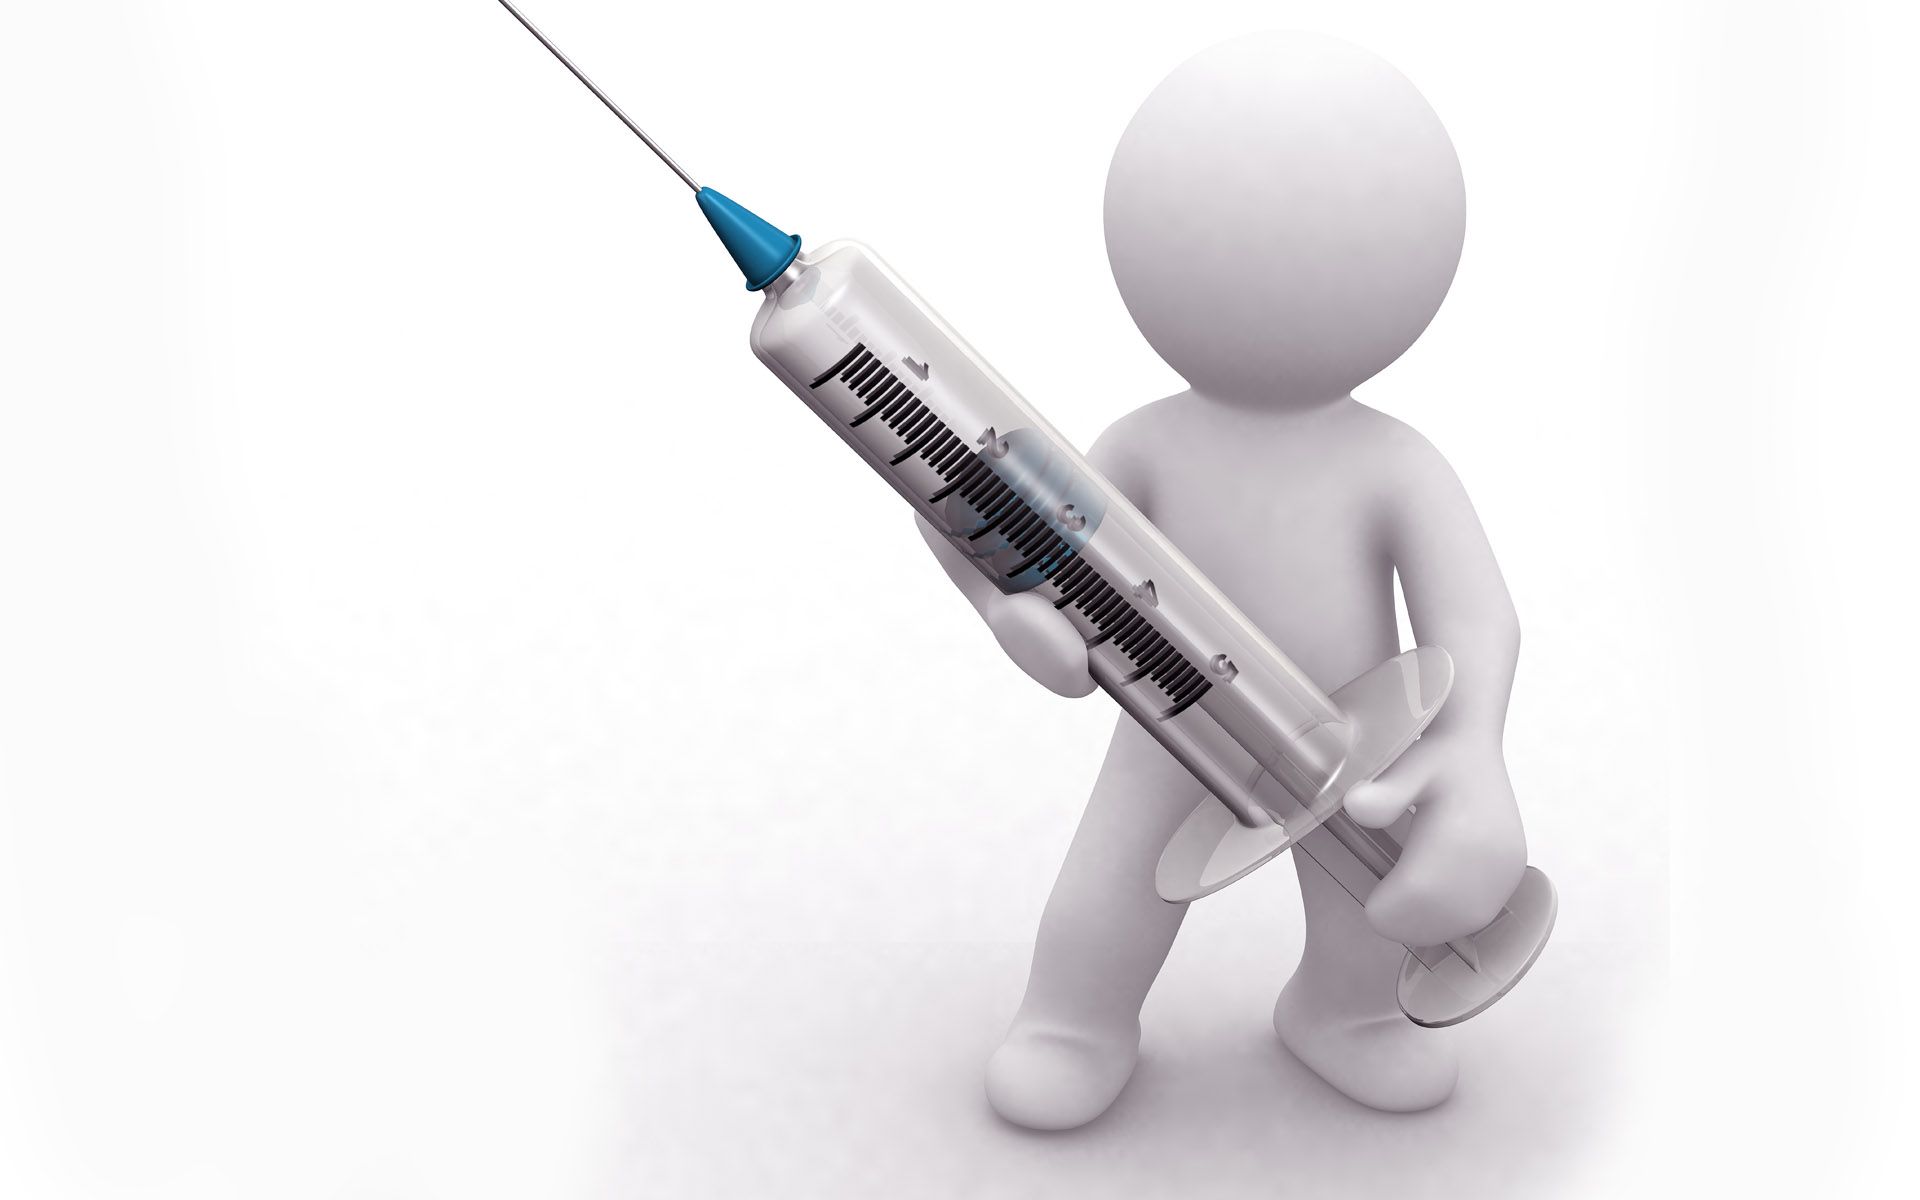 Syringe 4K wallpaper for your desktop or mobile screen free and easy to download